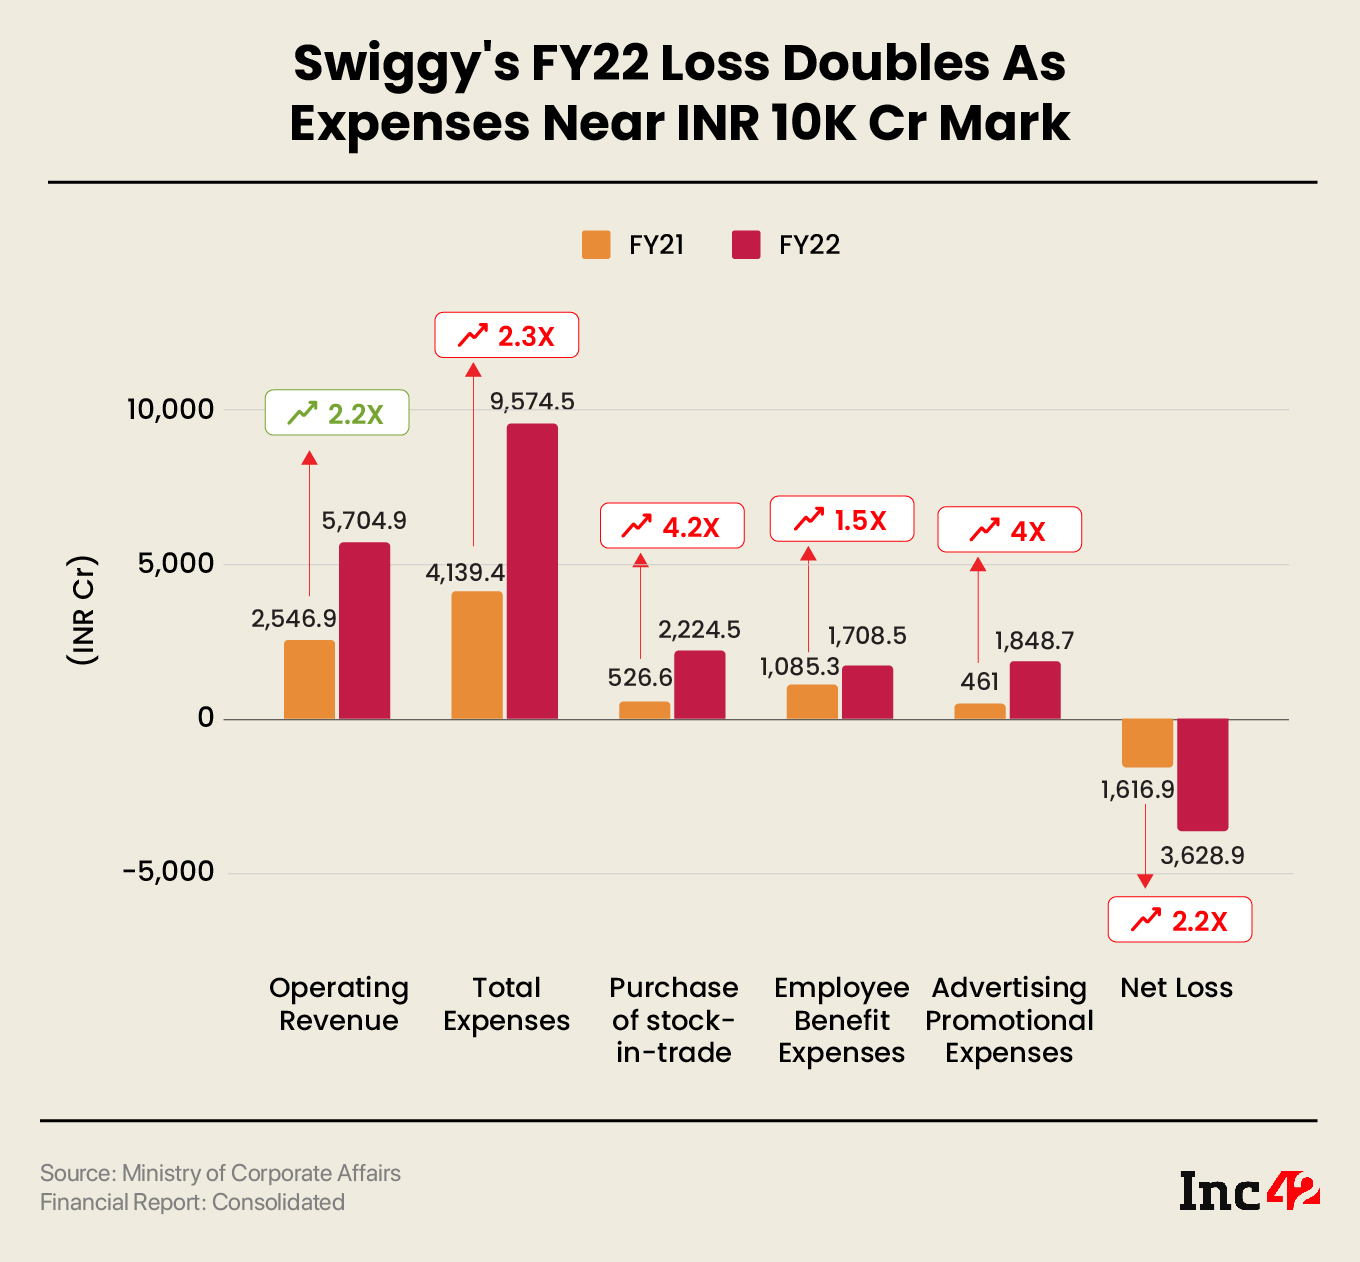 Swiggy’s Loss Doubles To INR 3,629 Cr In FY22 As Expenses Near INR 10K Cr Mark